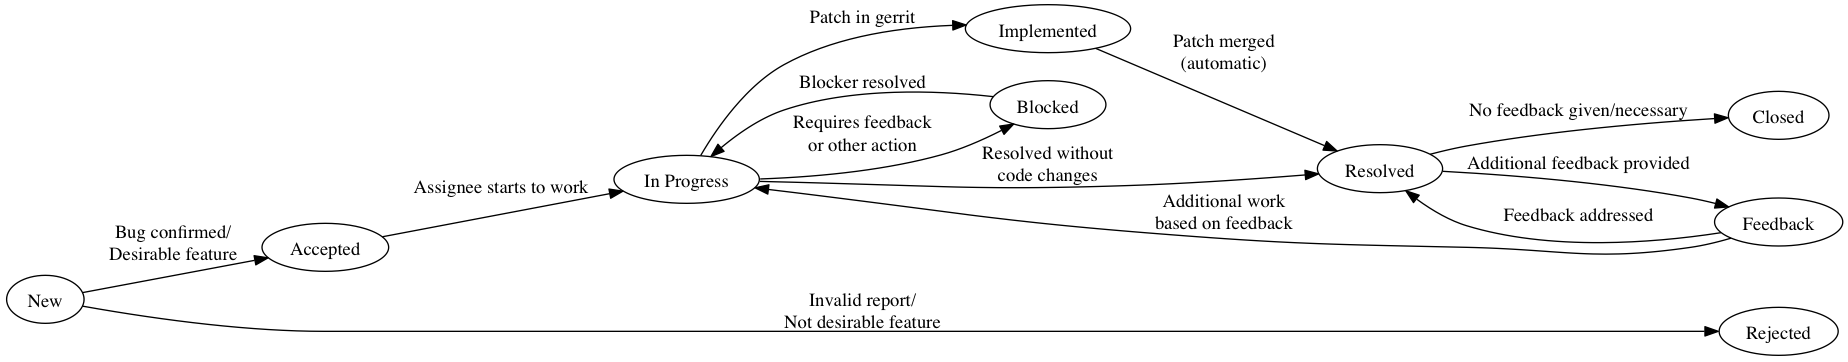 Sample procedure pathway for issues reported in redmine.